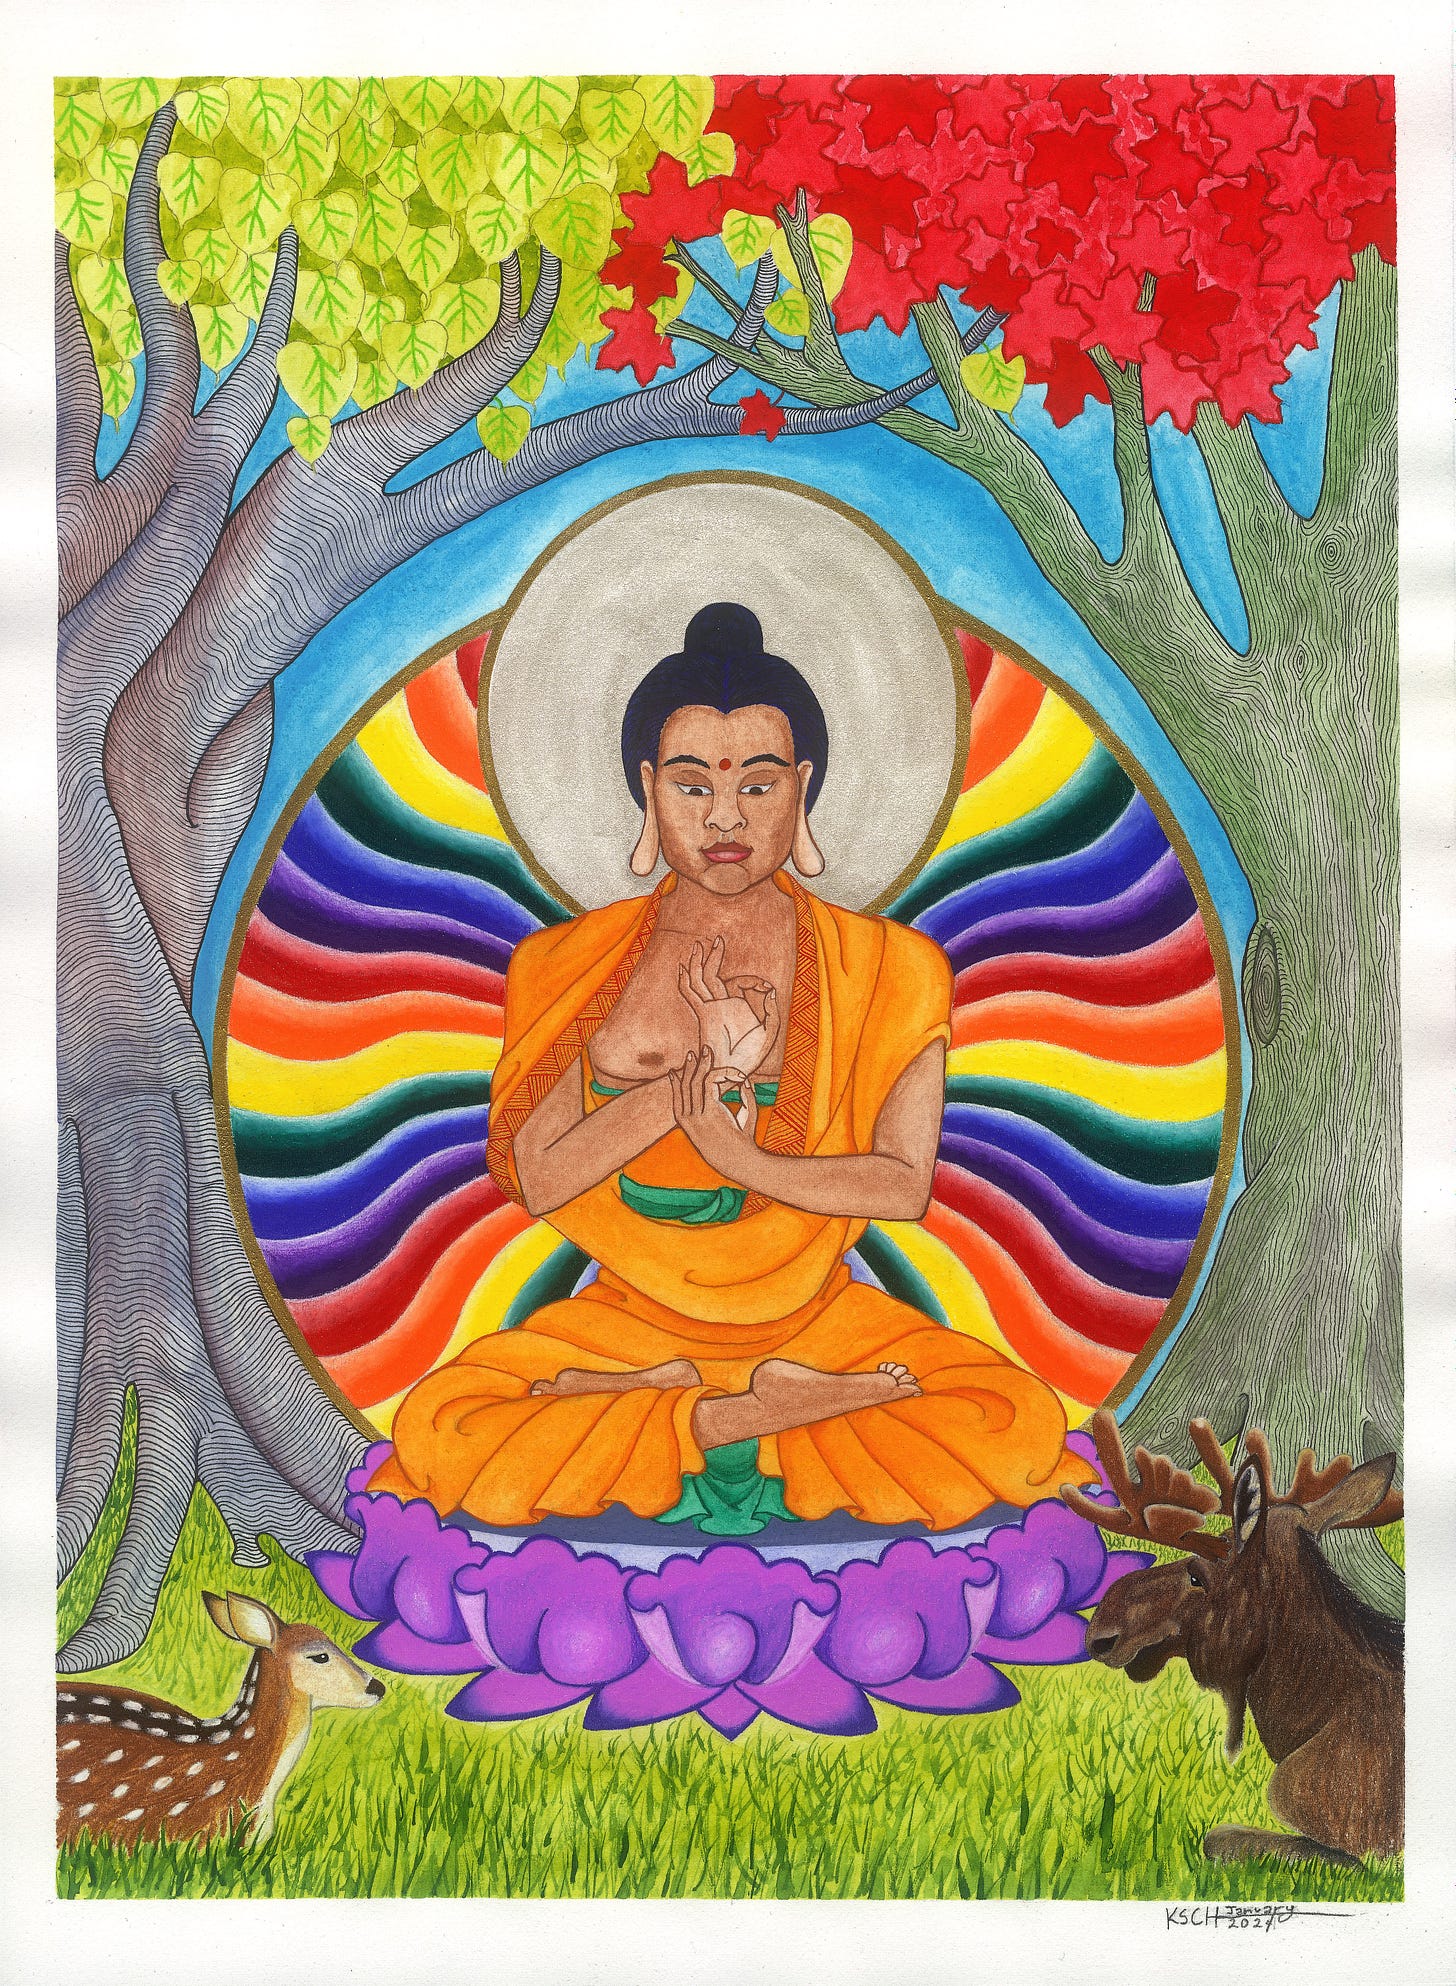 A vibrantly coloured thangka of Shakyamuni Buddha. He sits in the centre of the image, dressed in orange robes with a teal sash, his hands held up in a dharmachakra mudra. Behind him is a rainbow array. He is seated on a purple lotus throne and a deer and a moose are in the foreground, facing him, laying in the grass beneath his throne. The figure is framed by two trees. On the left, a Bodhia or Pippala tree, native of India, and on the right, a red maple tree, native of North America. 